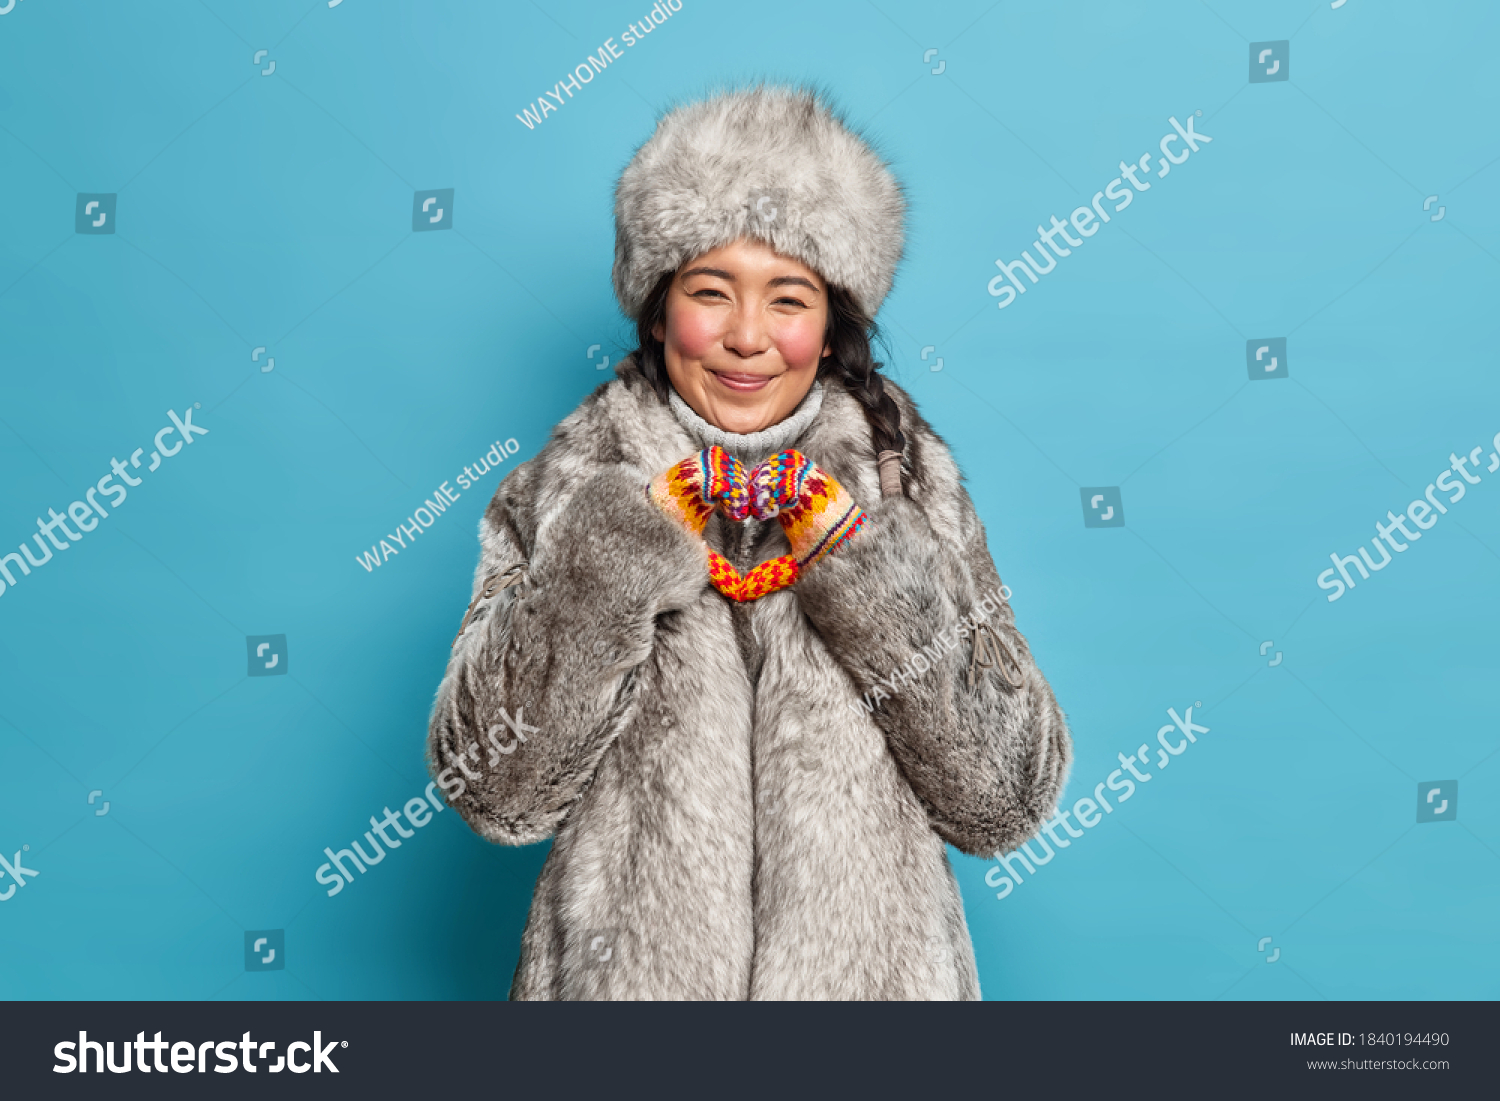 Cheerful eskimo woman shapes heart gesture expresses love dressed in warm winter clothing isolated over blue background. Affectionate reindeer herder in fur outerwear. Nothern people and cold season #1840194490